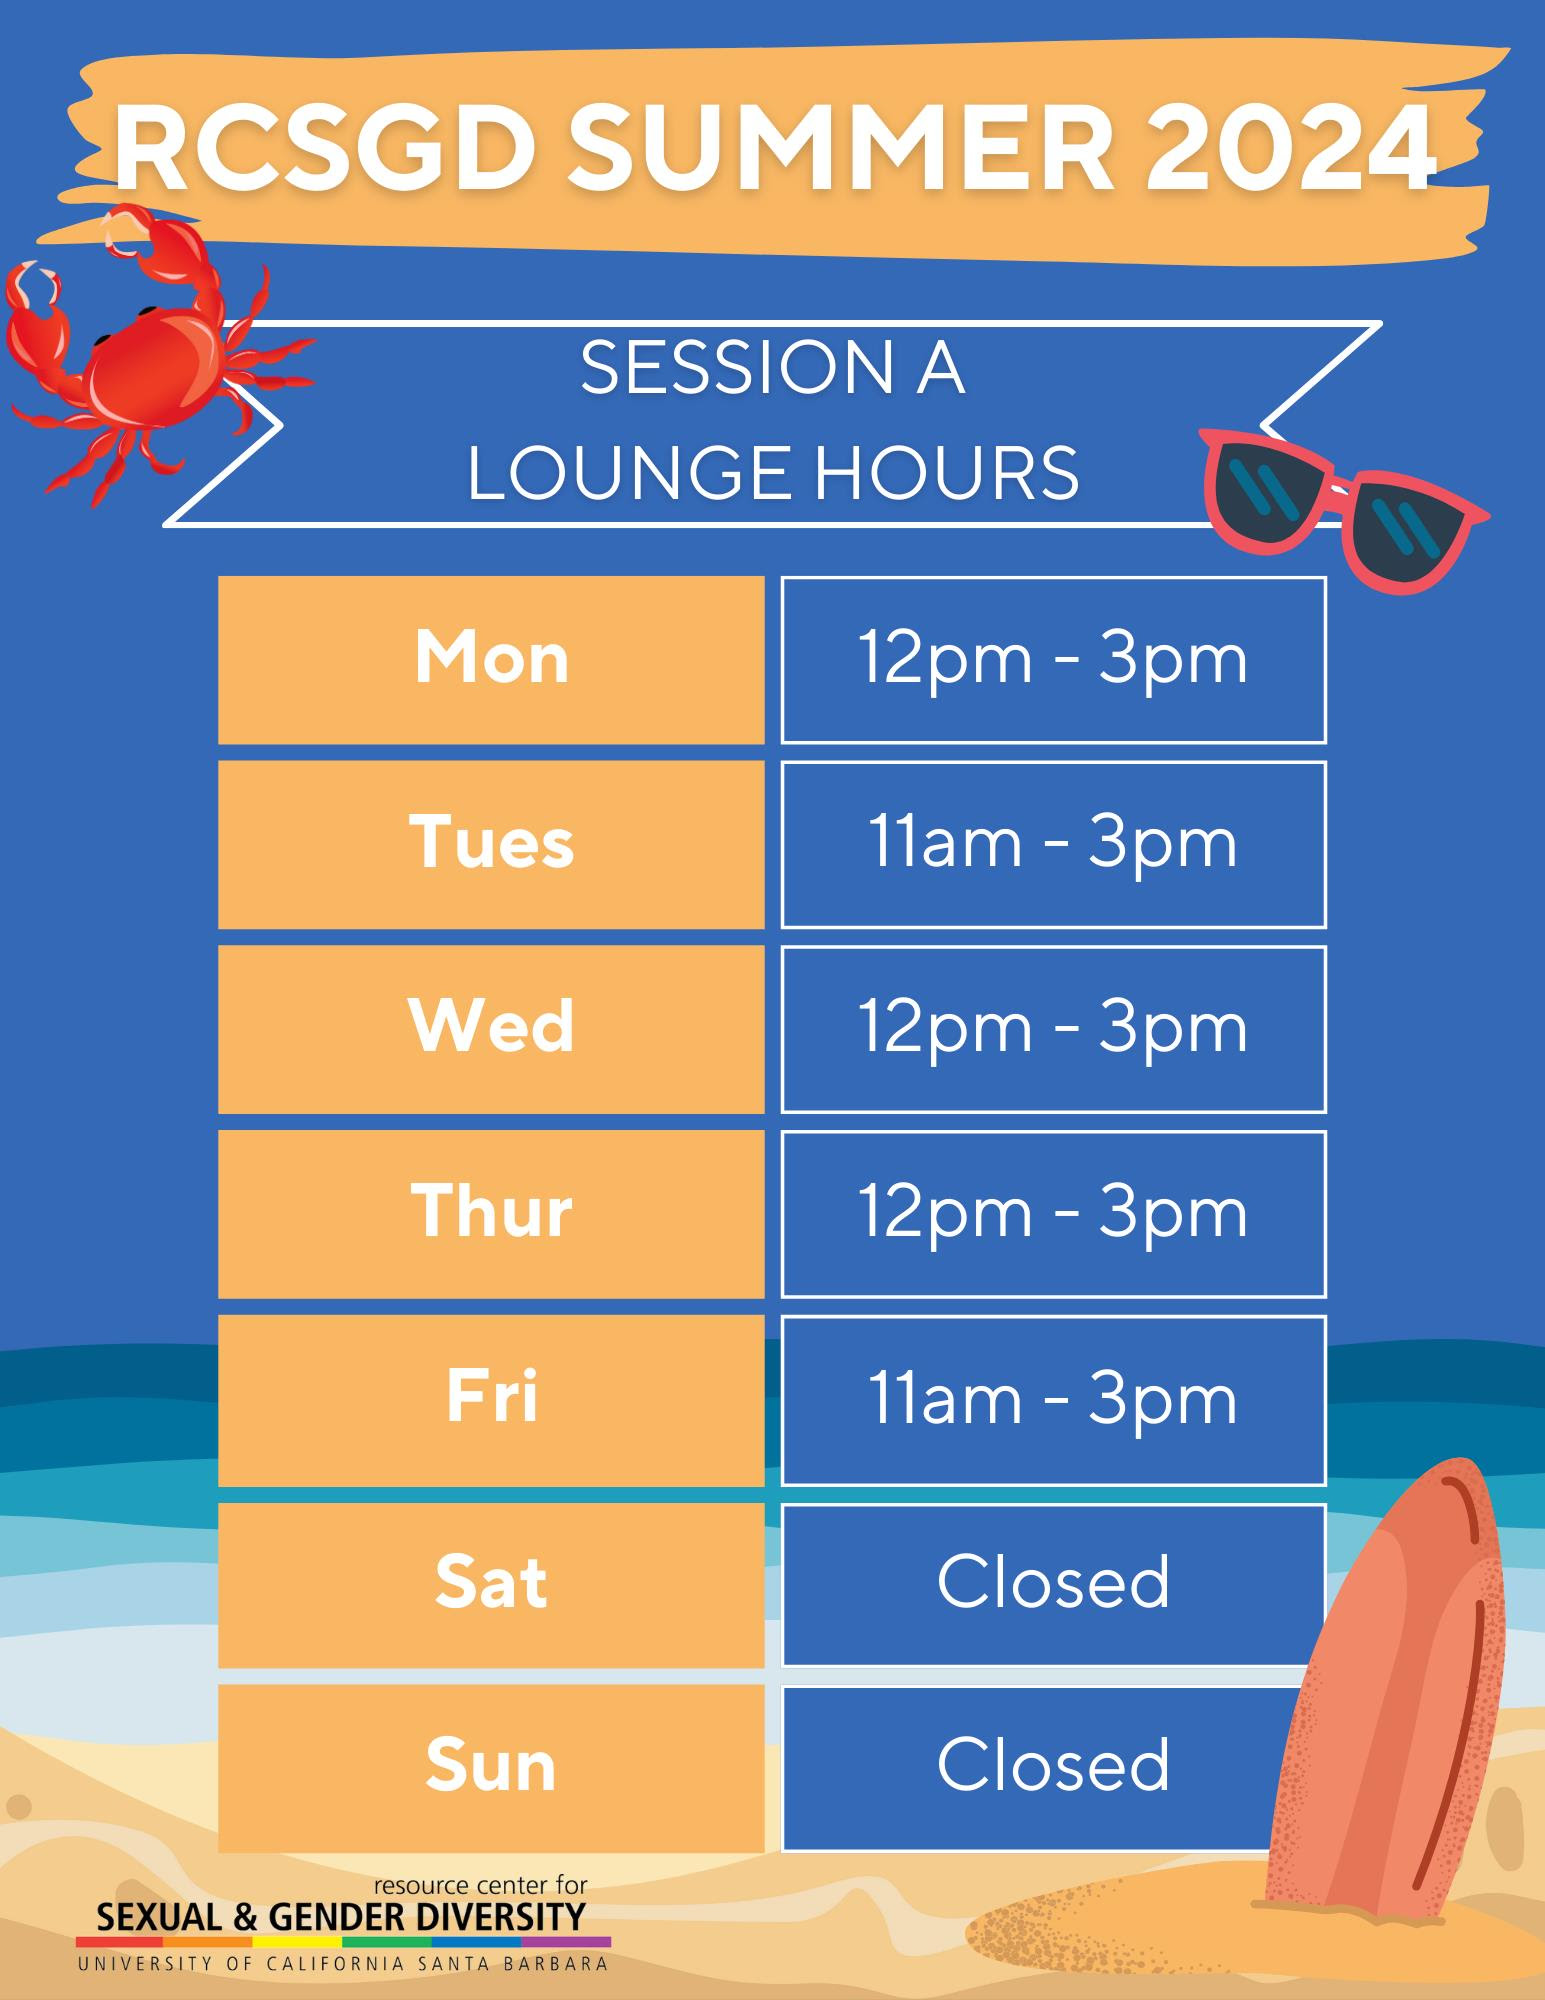 A summer beach scene with RCSGD's Summer Hours for Session A. They are open Monday, Wednesday, and Thursday from 12pm-3pm and Tuesday and Friday from 11am-3pm.